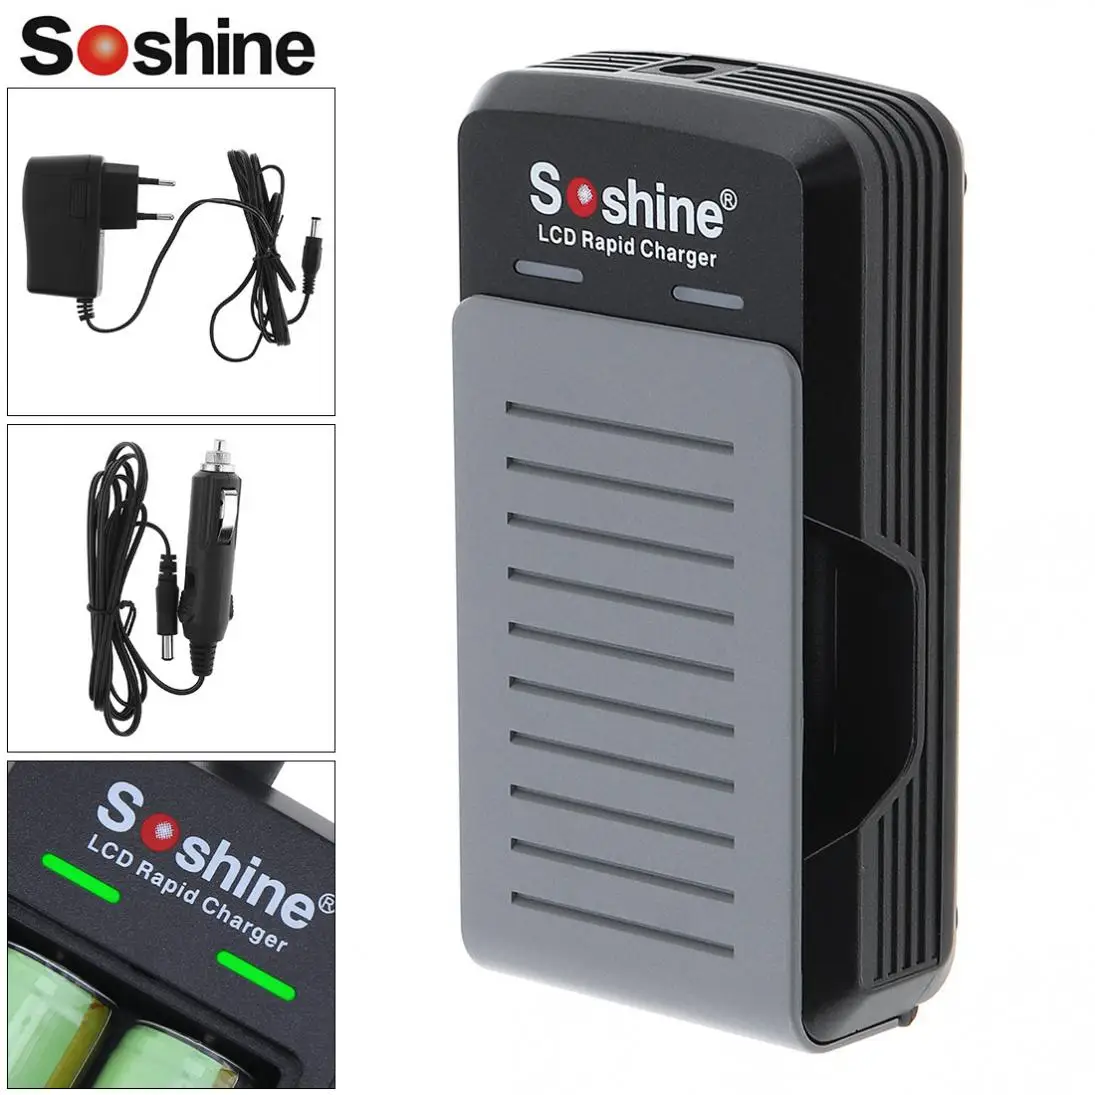 

Soshine 100 - 240V S2 2 Slots Quick Universal Battery Charger with LED Indicator for 18650 / 17650 Batteries